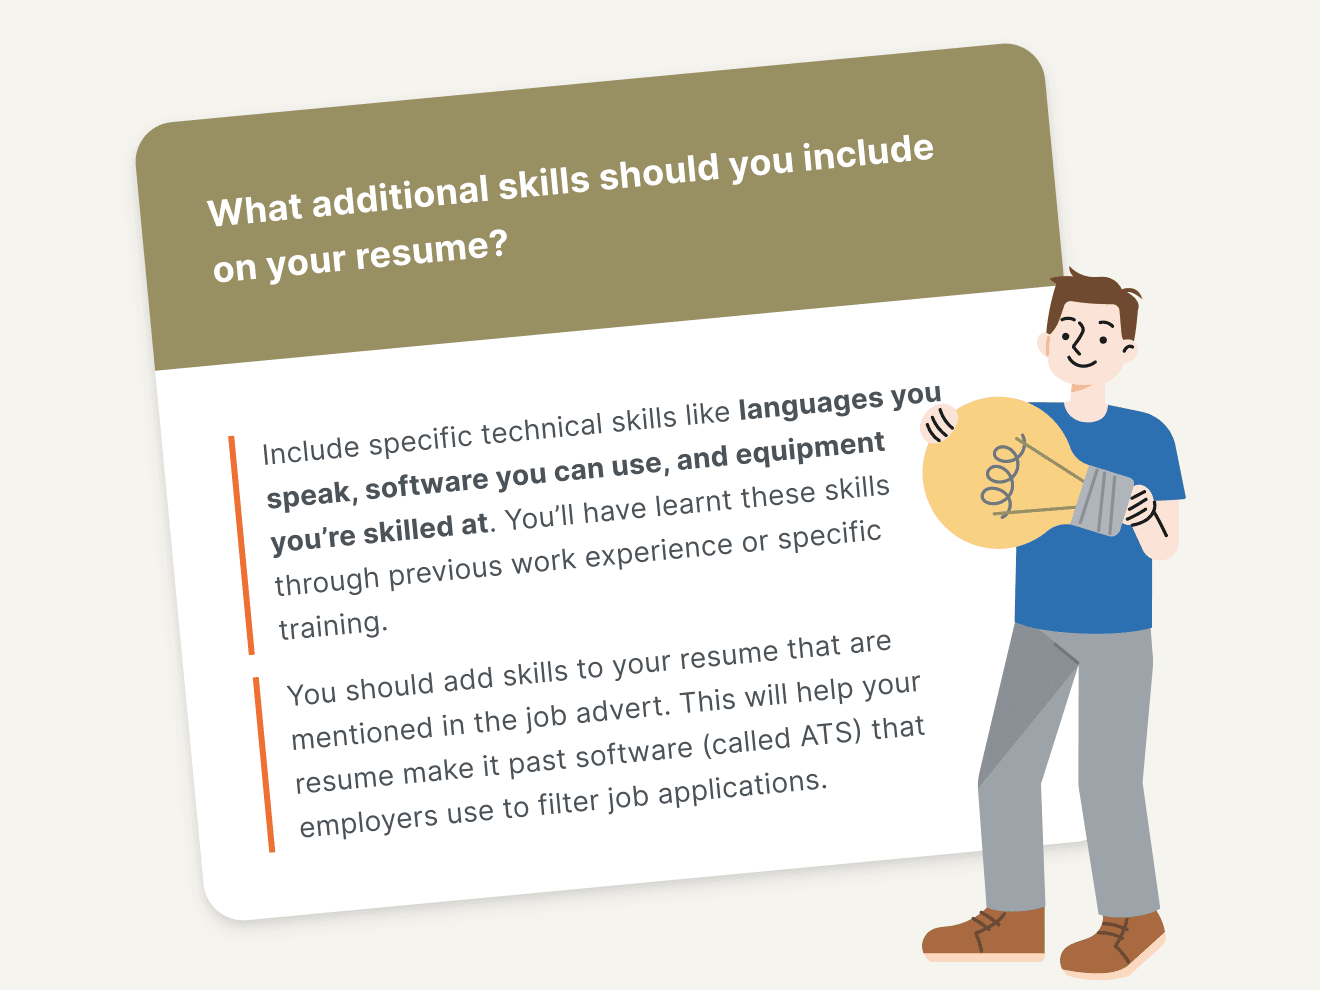 A tip advising users to add skills to their resumes.